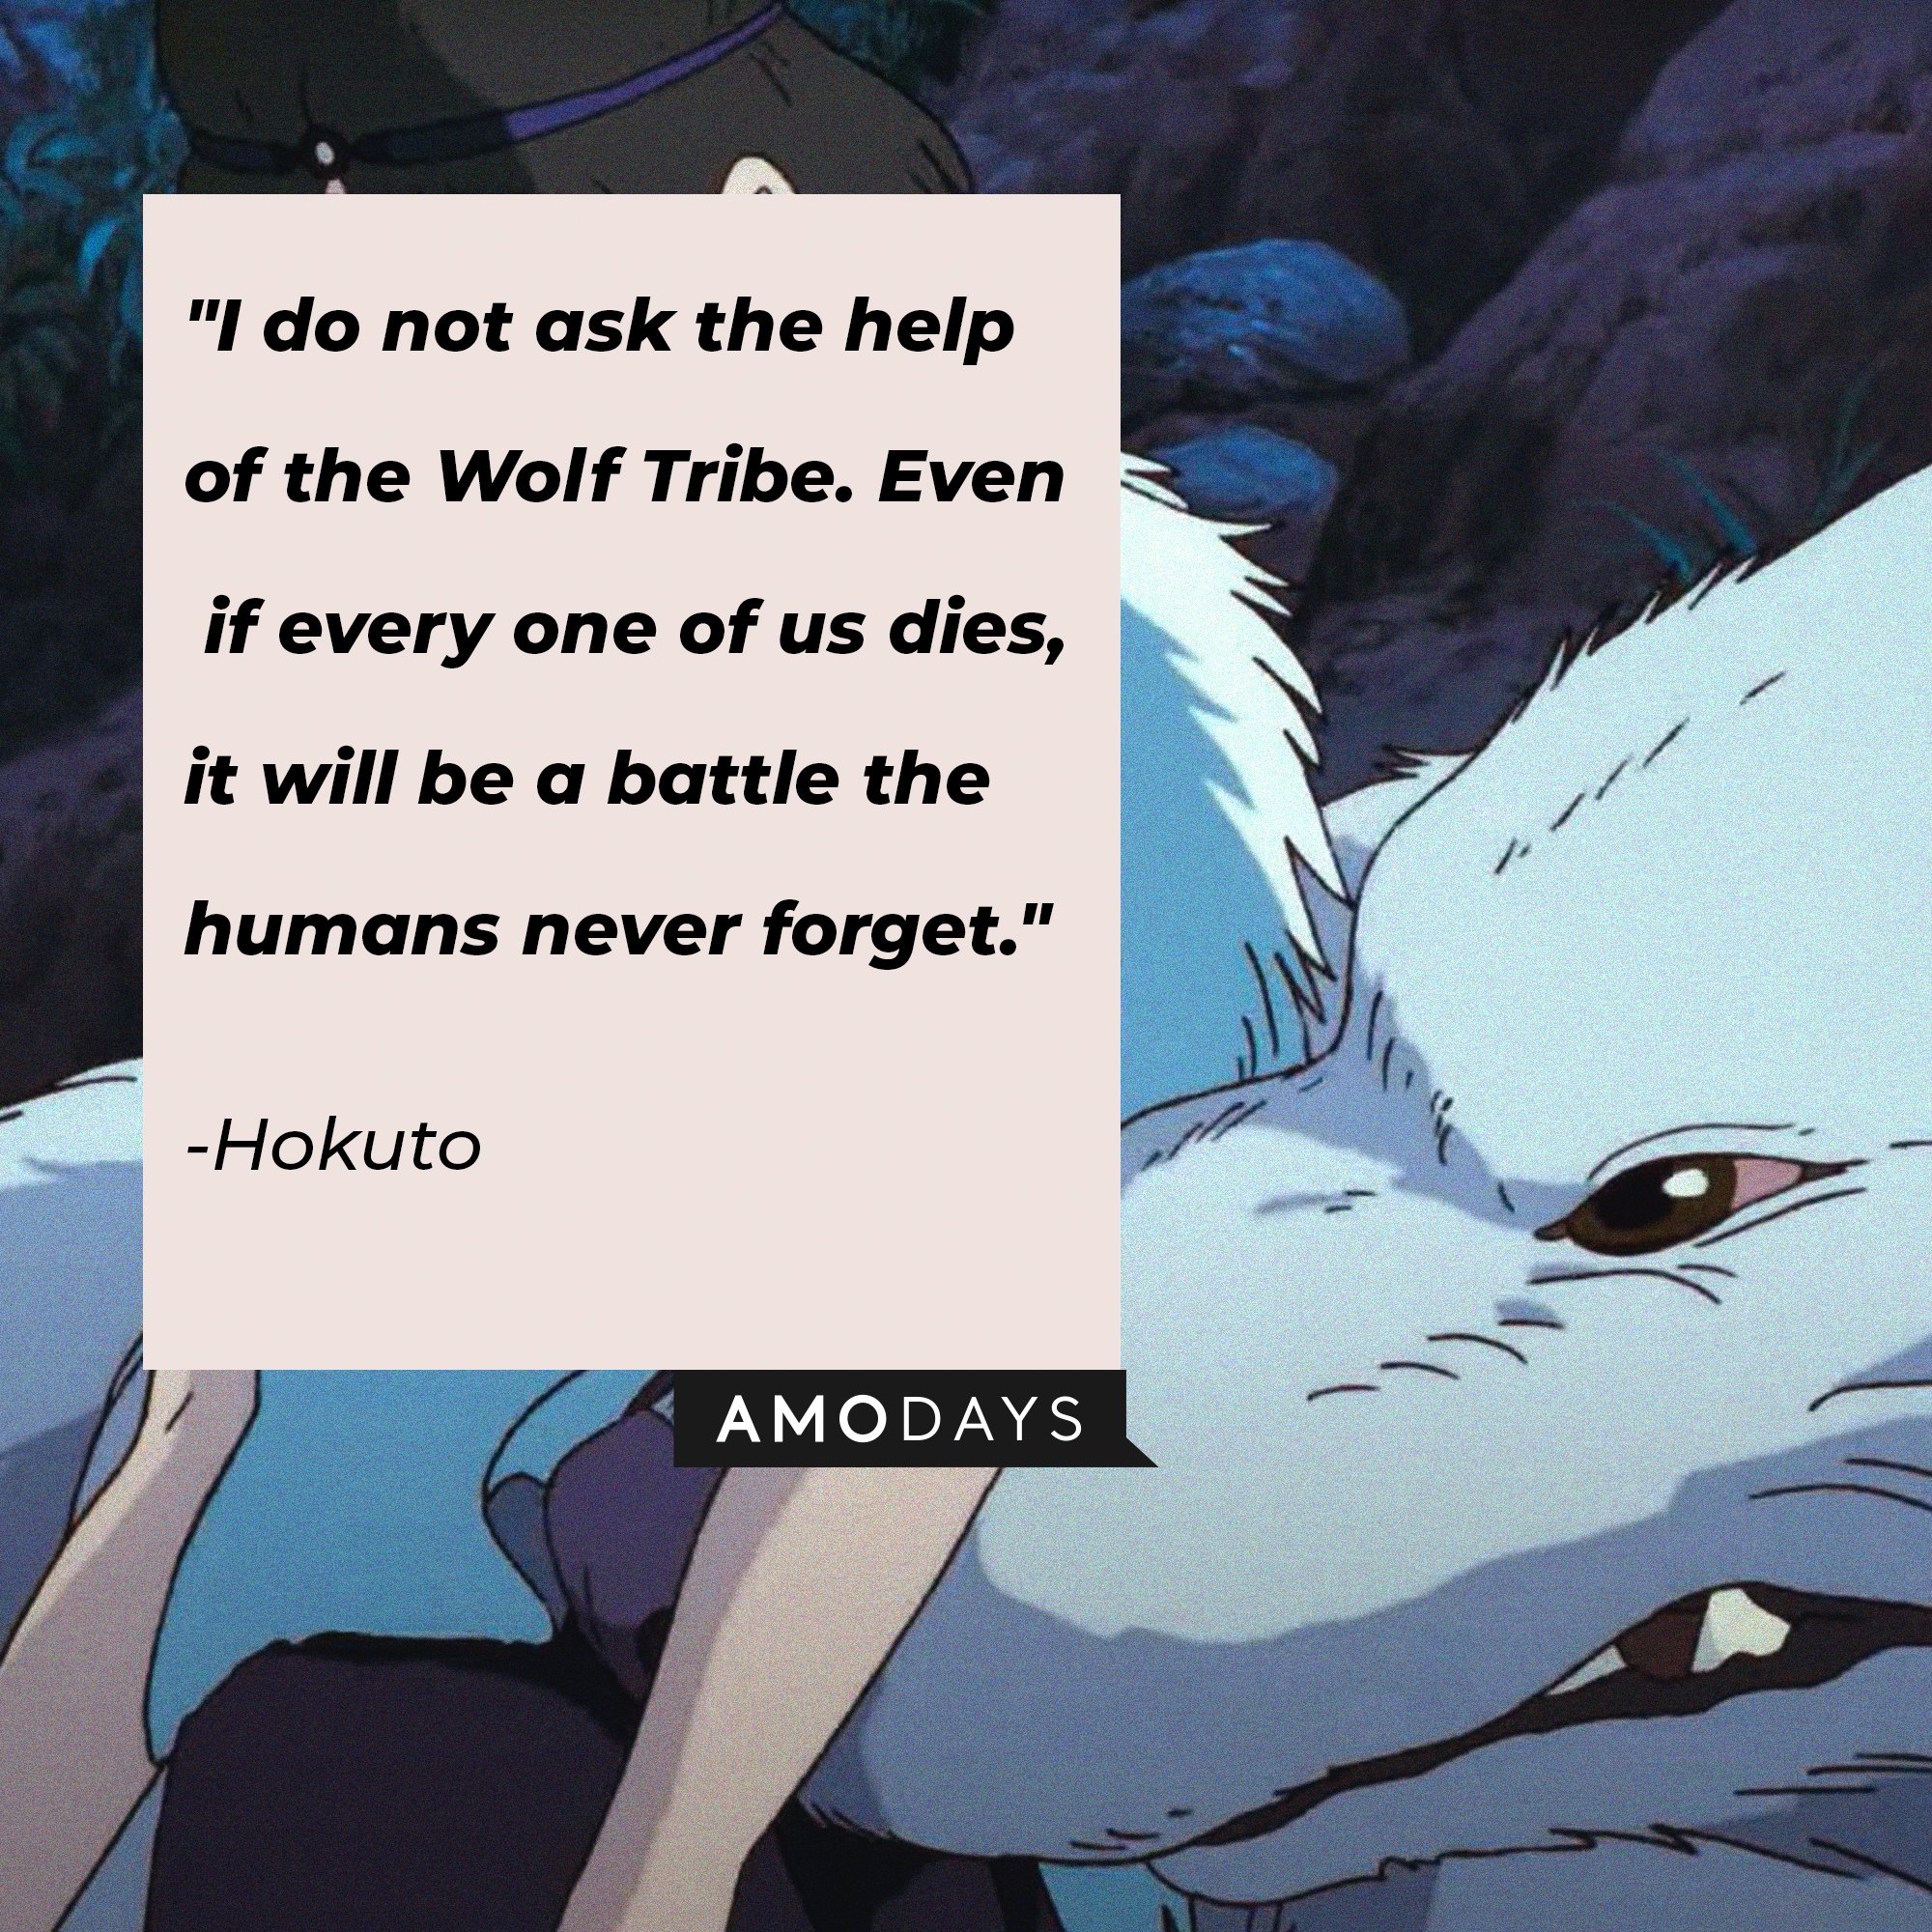 Hokuto's quote: "I do not ask the help of the Wolf Tribe. Even if every one of us dies, it will be a battle the humans never forget." | Image: AmoDays